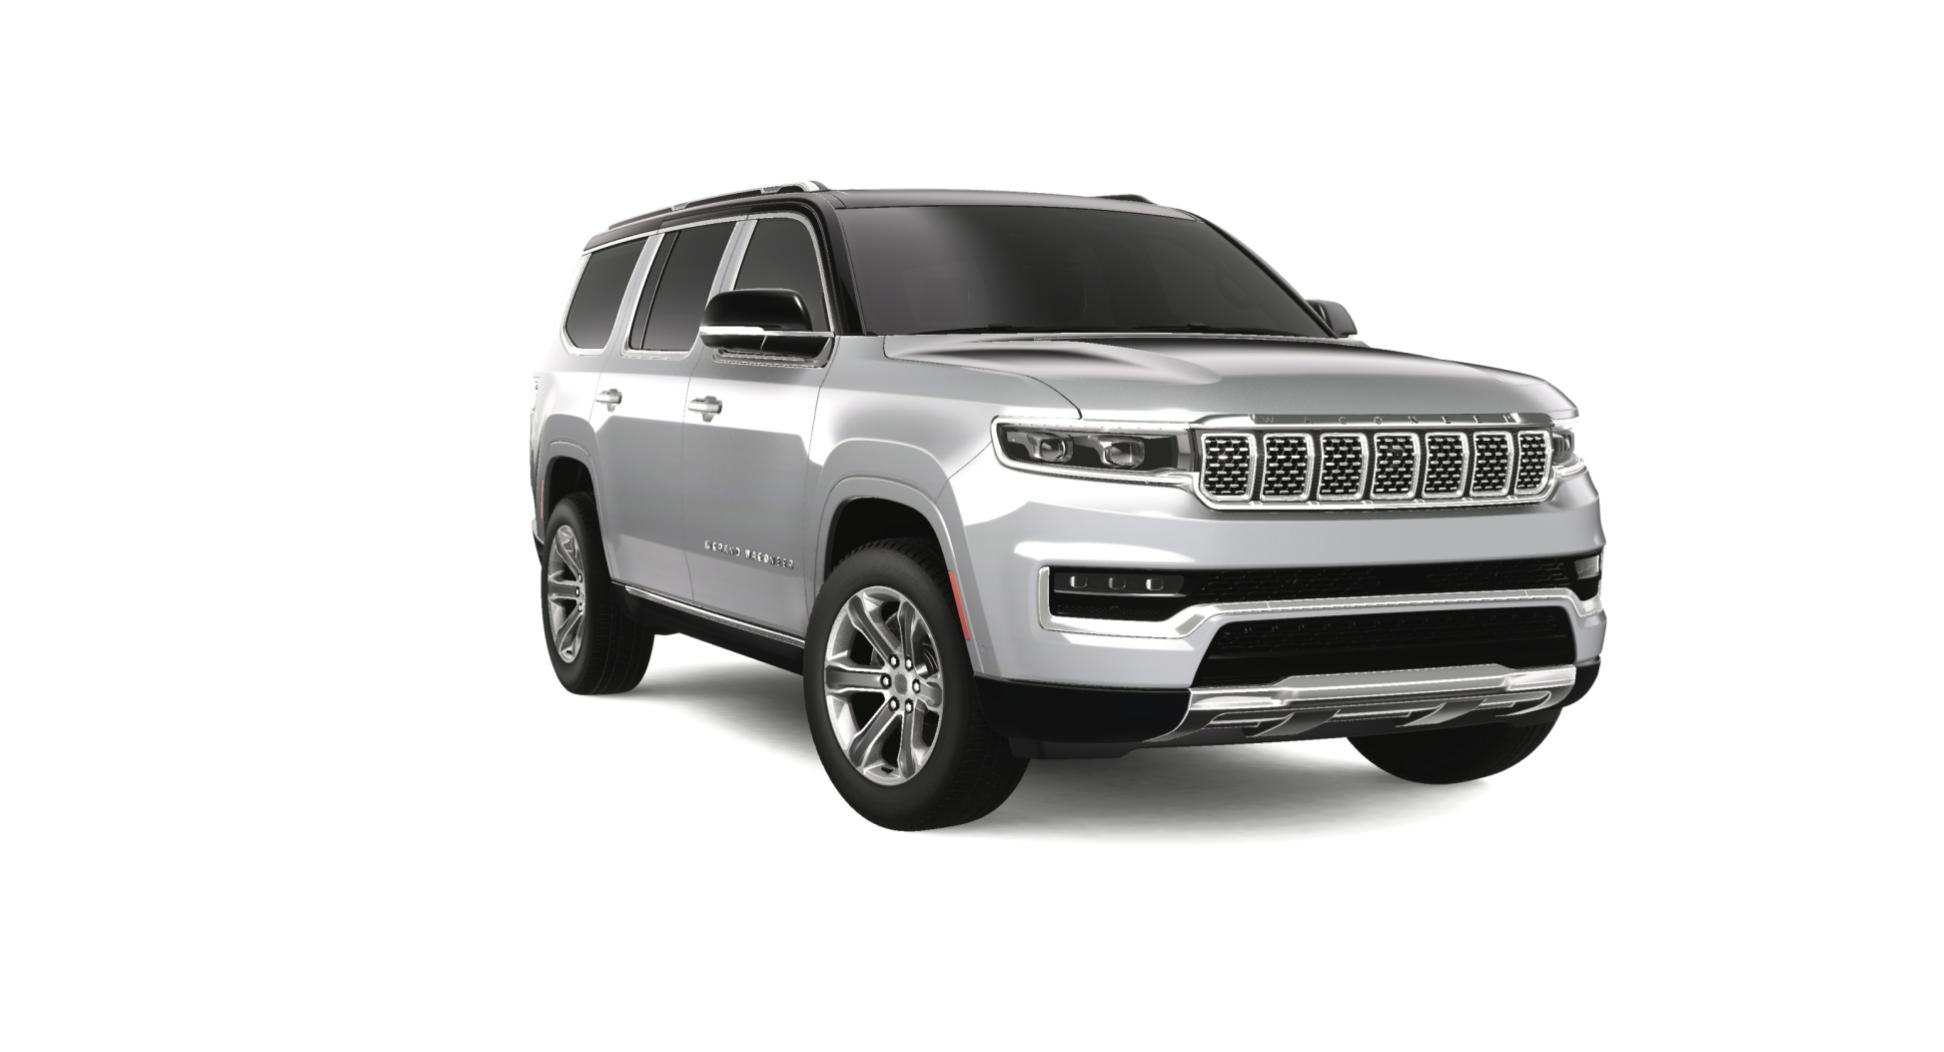 Visit Columbia Chrysler Dodge Jeep Ram FIAT to view a great range of new and used 2023 Jeep Wagoneers and get behind the wheel to experience the luxury of the 2023 Jeep Wagoneer Interior.